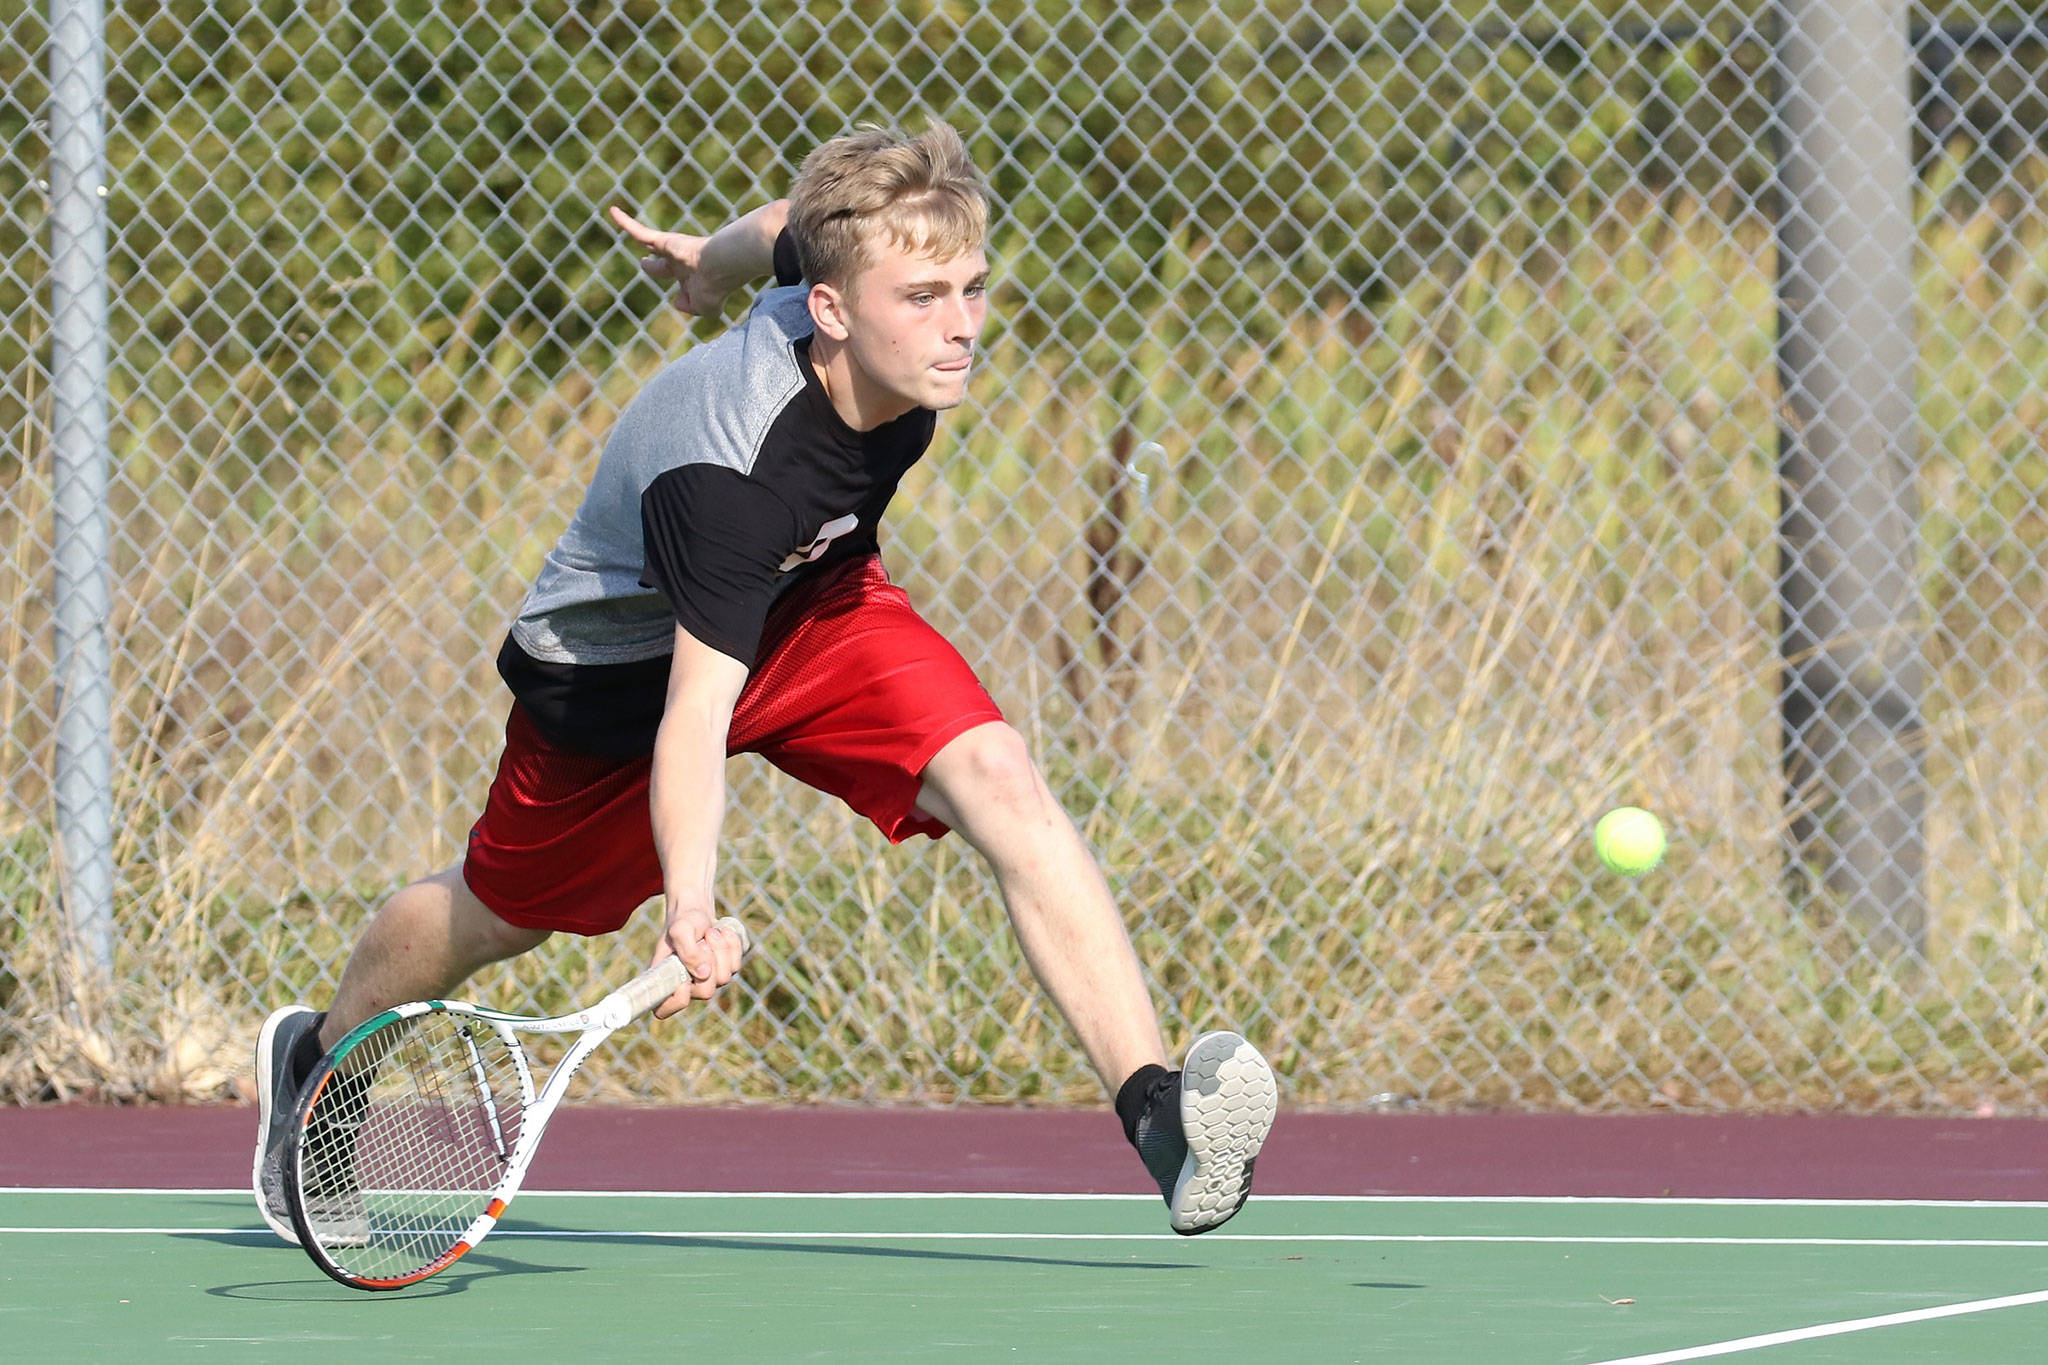 Nile Lockwood races in for a shot in his win in third singles. (Photo by John Fisken)